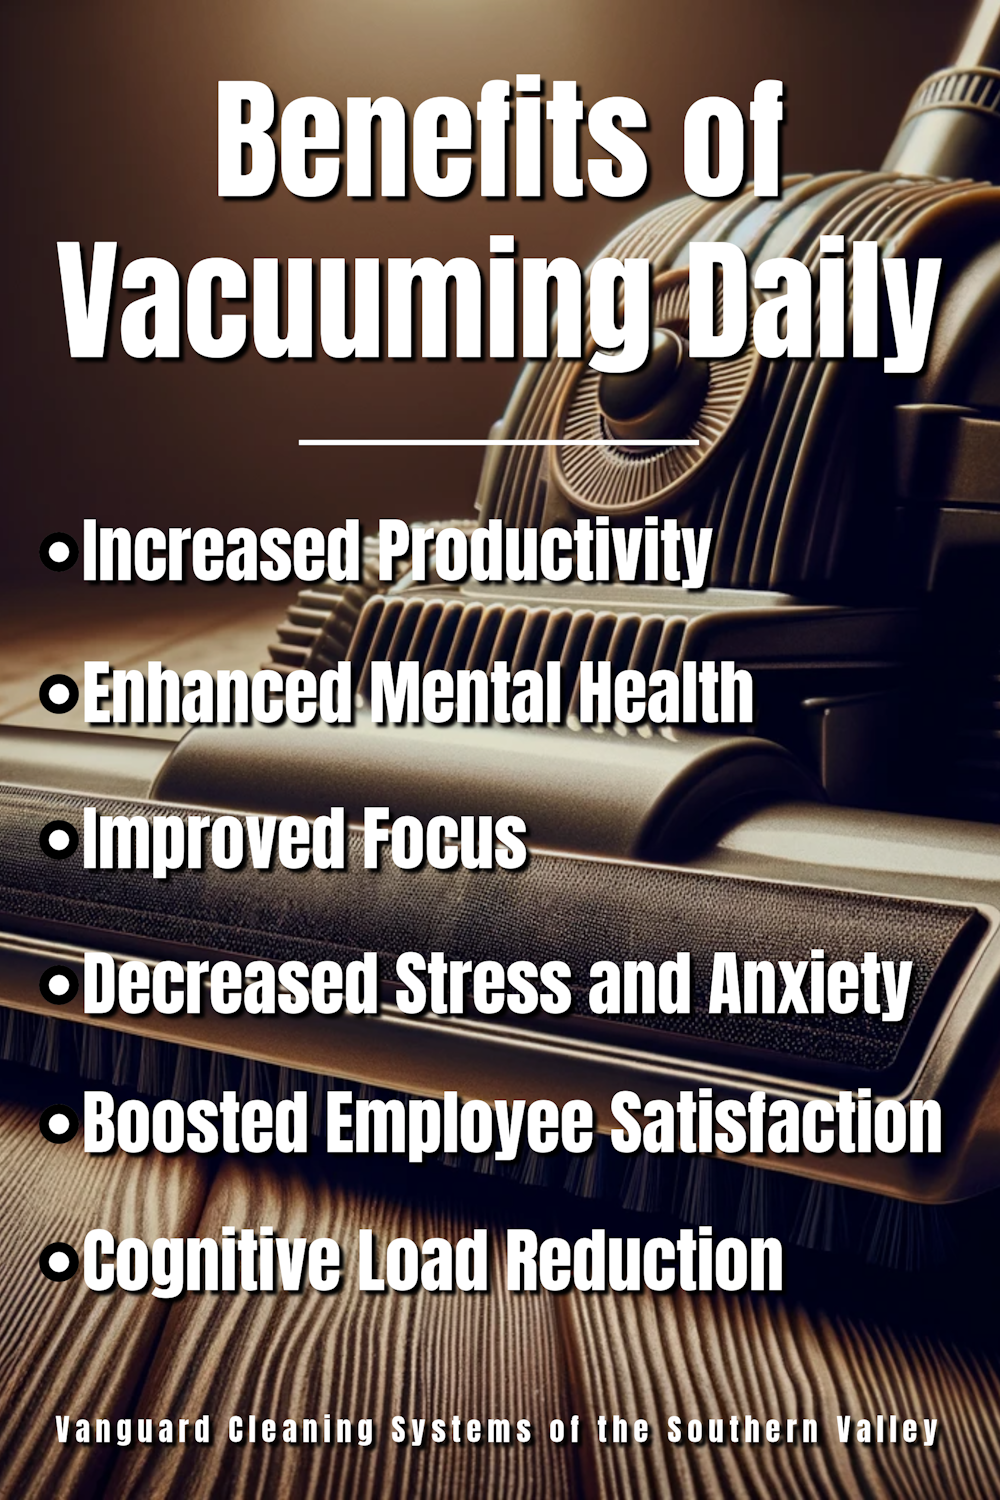 The Benefits of Vacuuming Daily